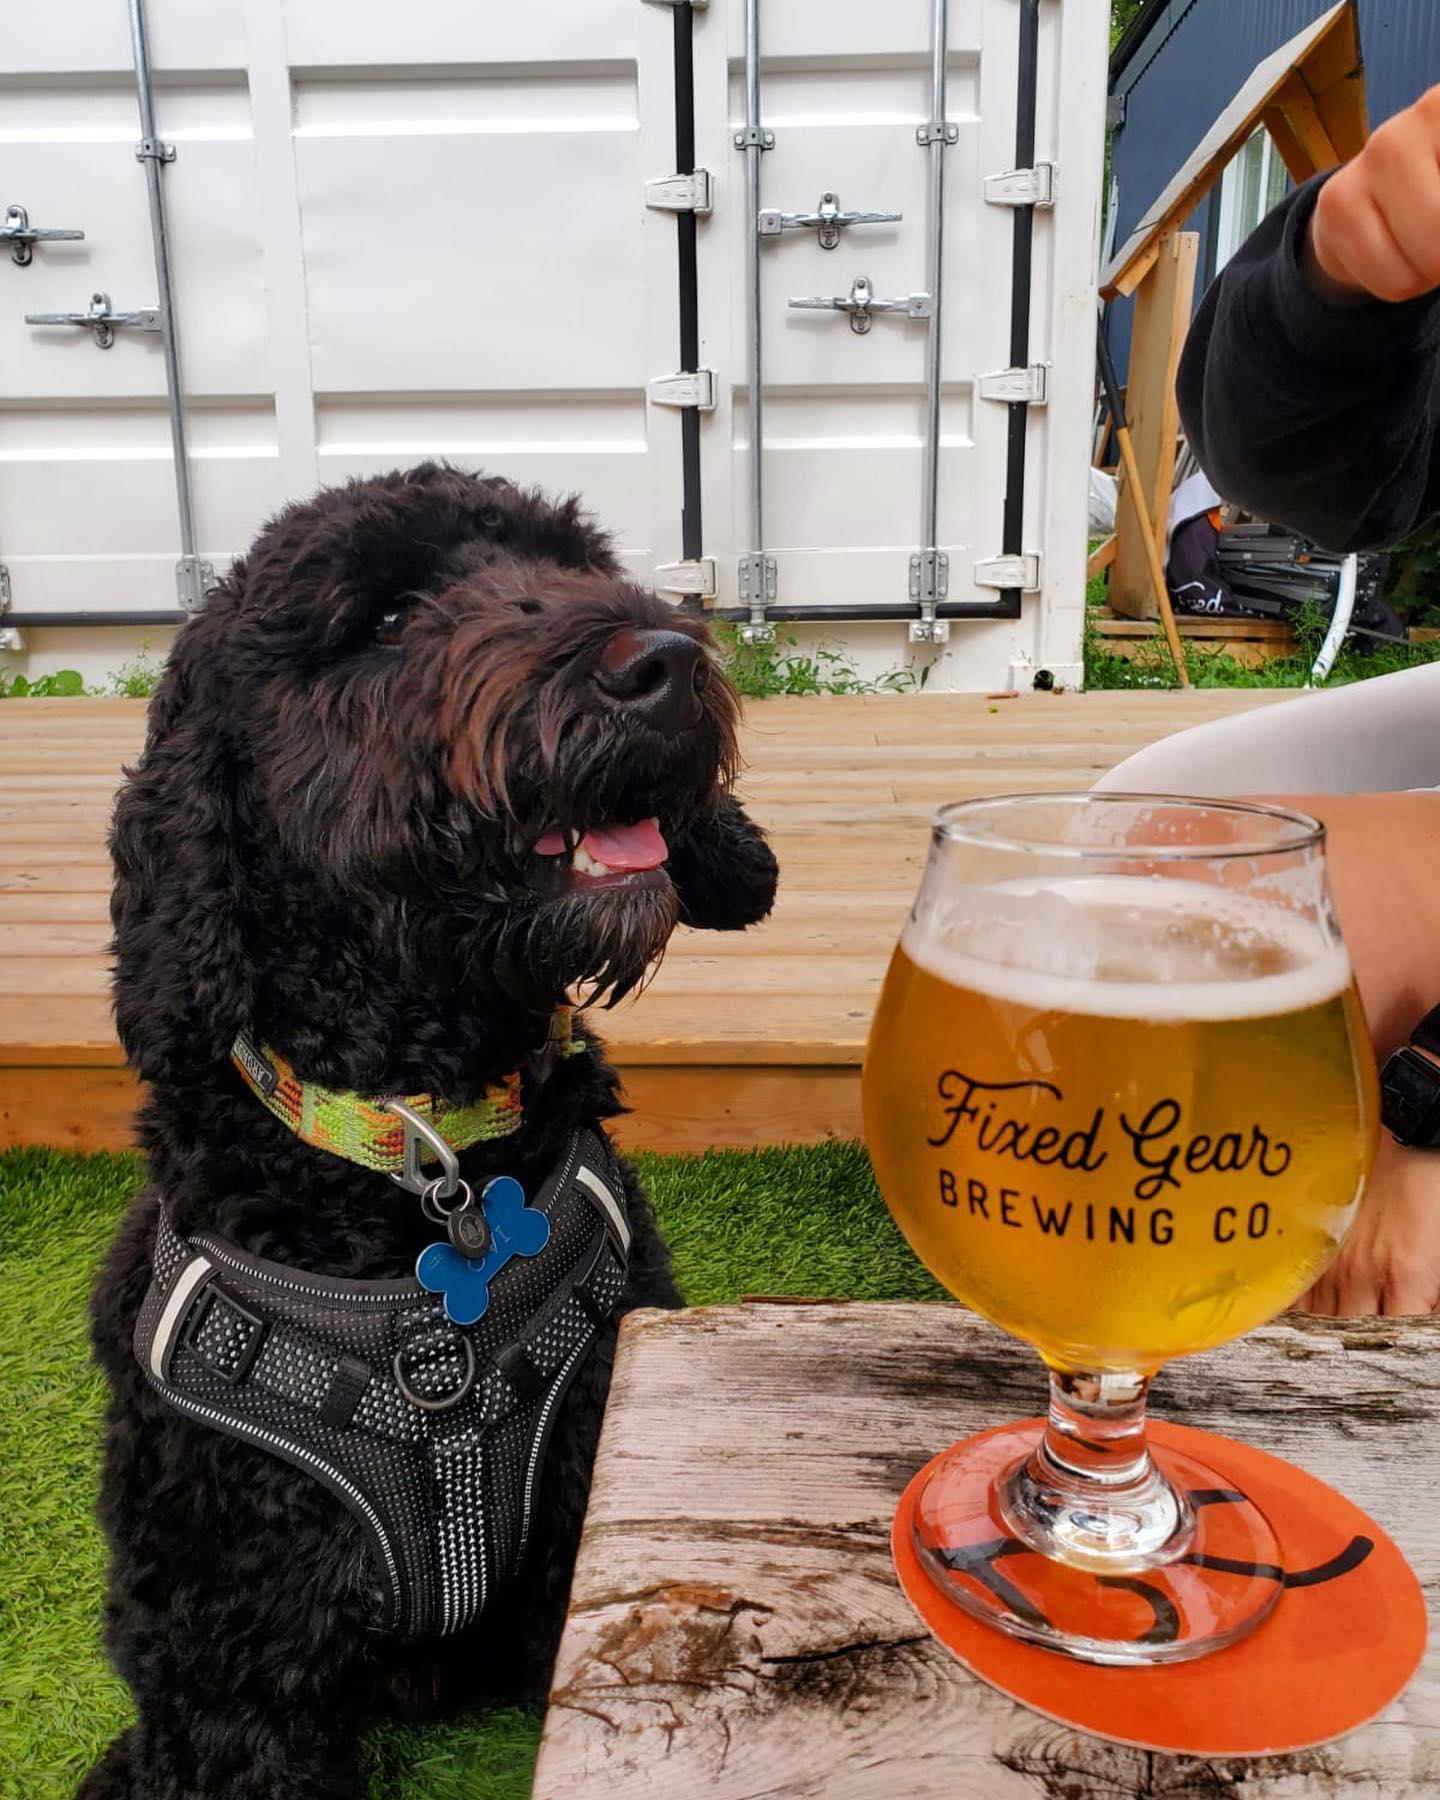 Pet Friendly Fixed Gear Brewing Co. Tasting Room